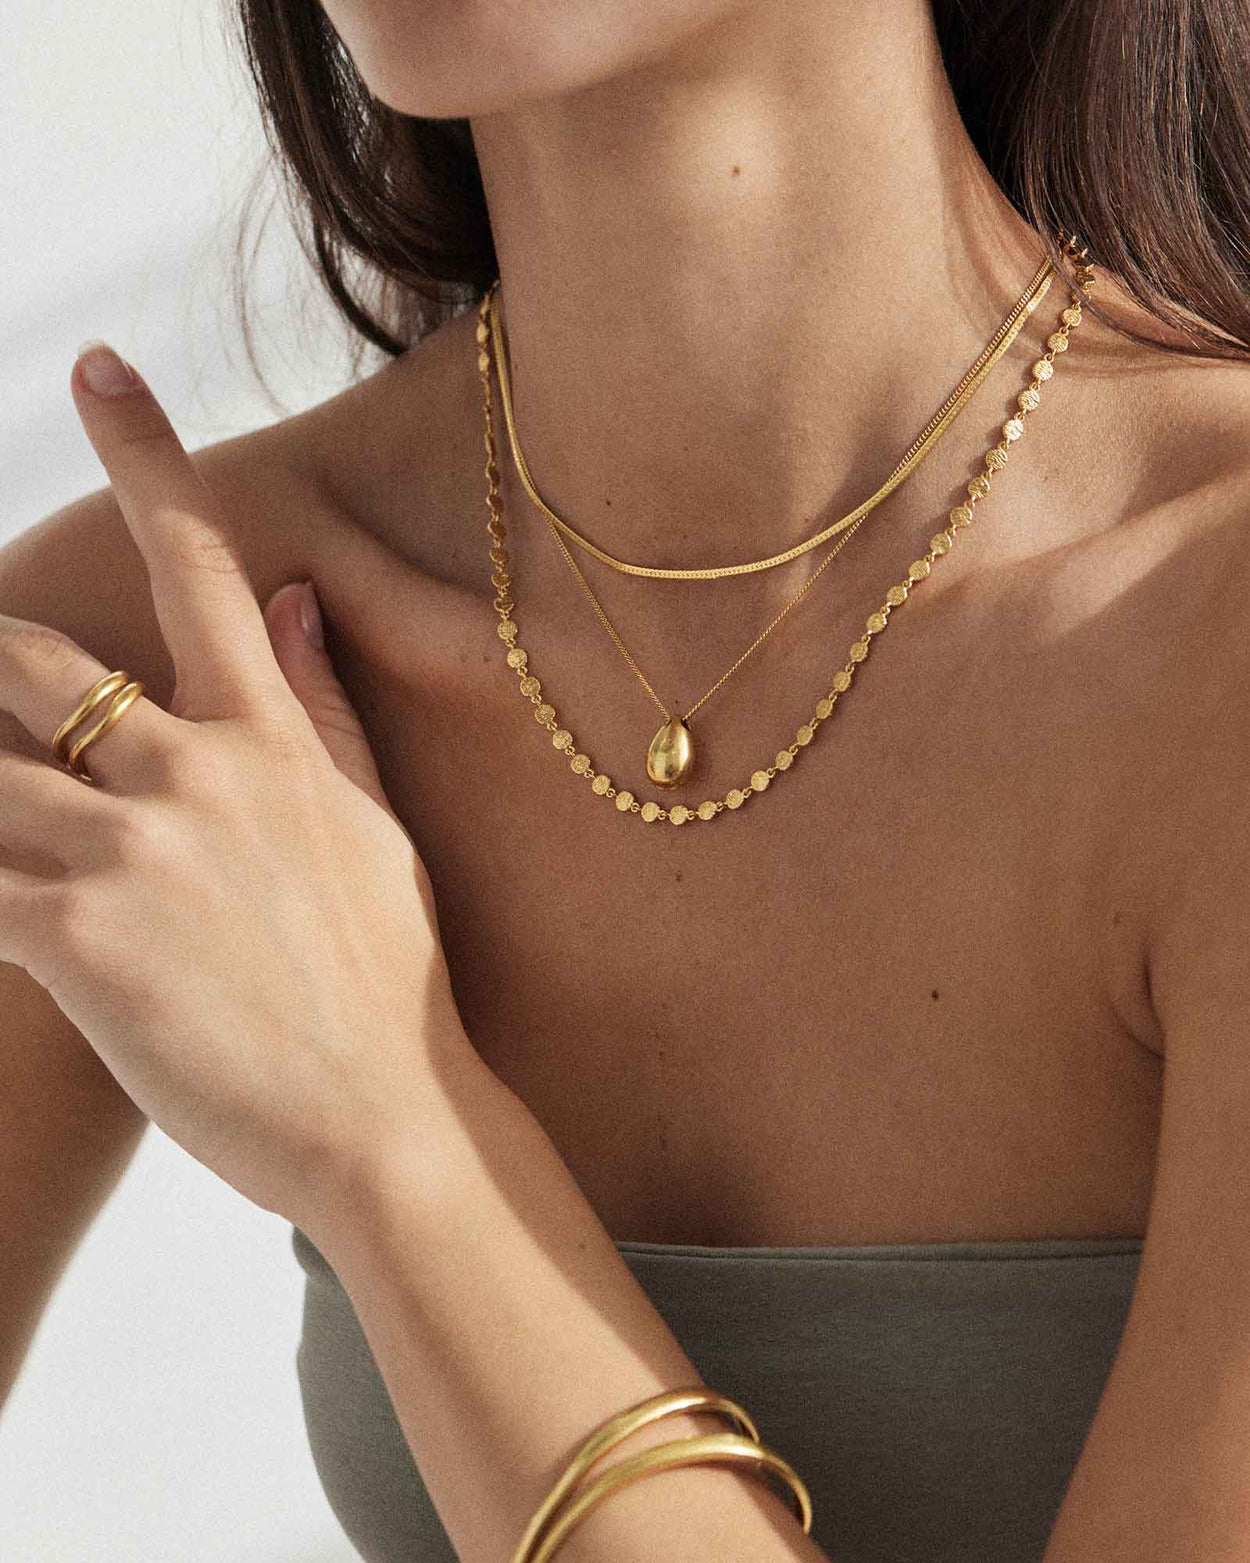 REFLECTION CHAIN NECKLACE (18K GOLD PLATED) – KIRSTIN ASH (Australia)